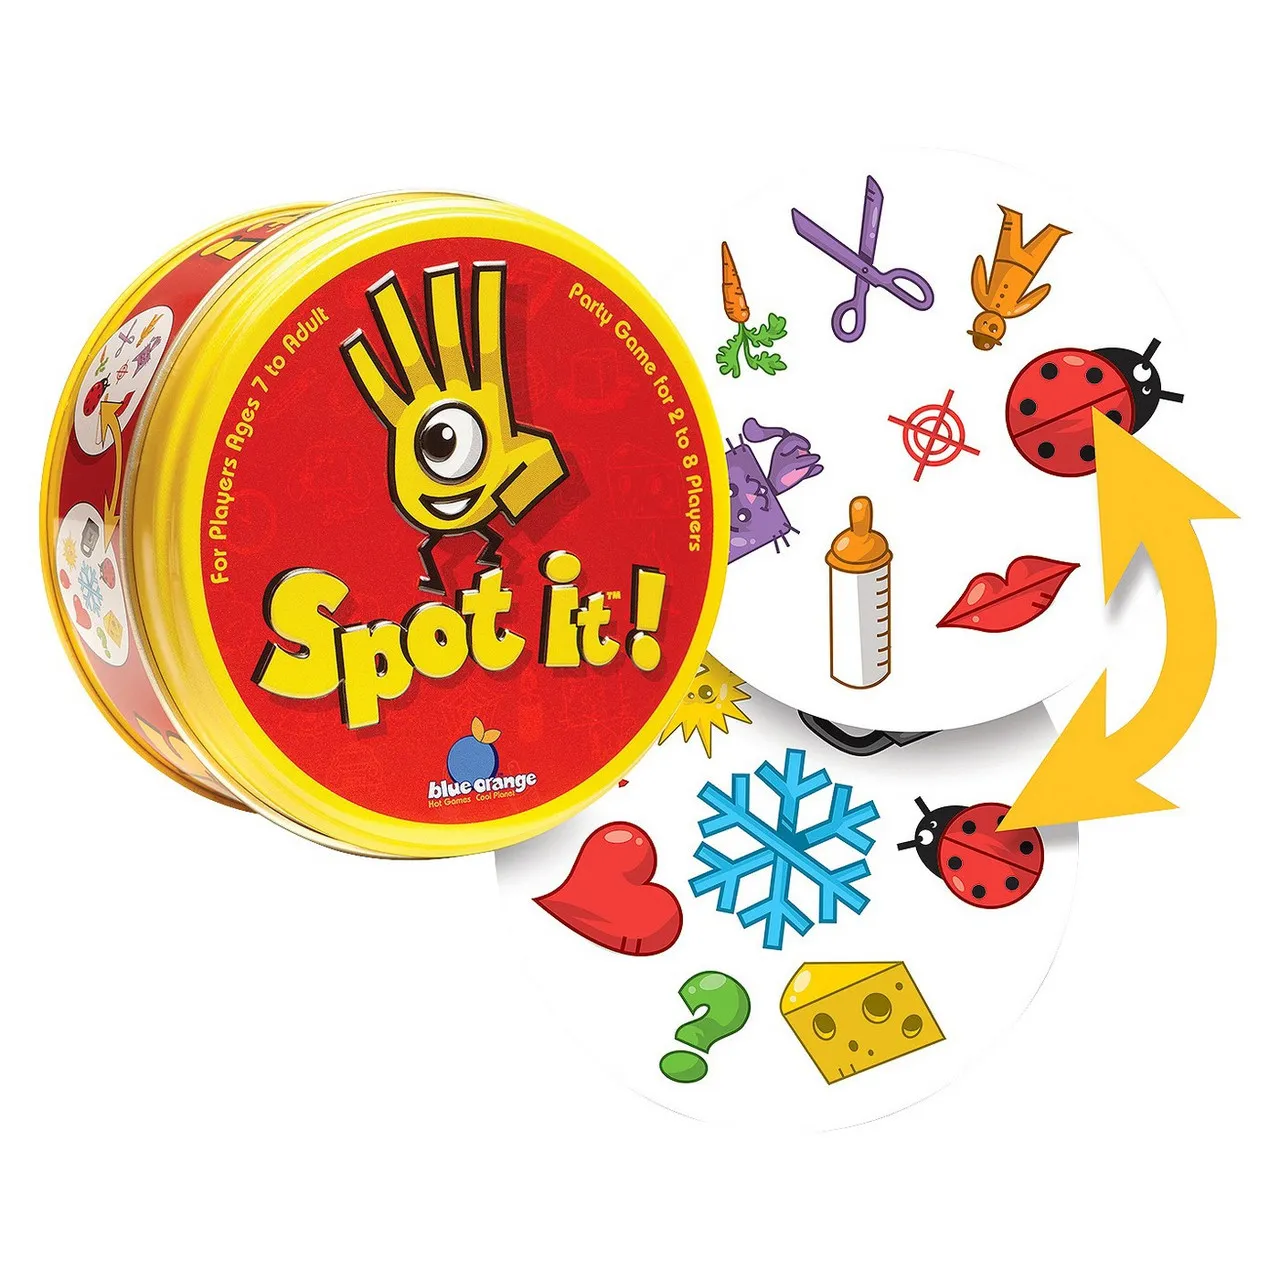 Spot it Kids Game High Quality Paper Dobble it Fit For Family Game Cards Game DE 